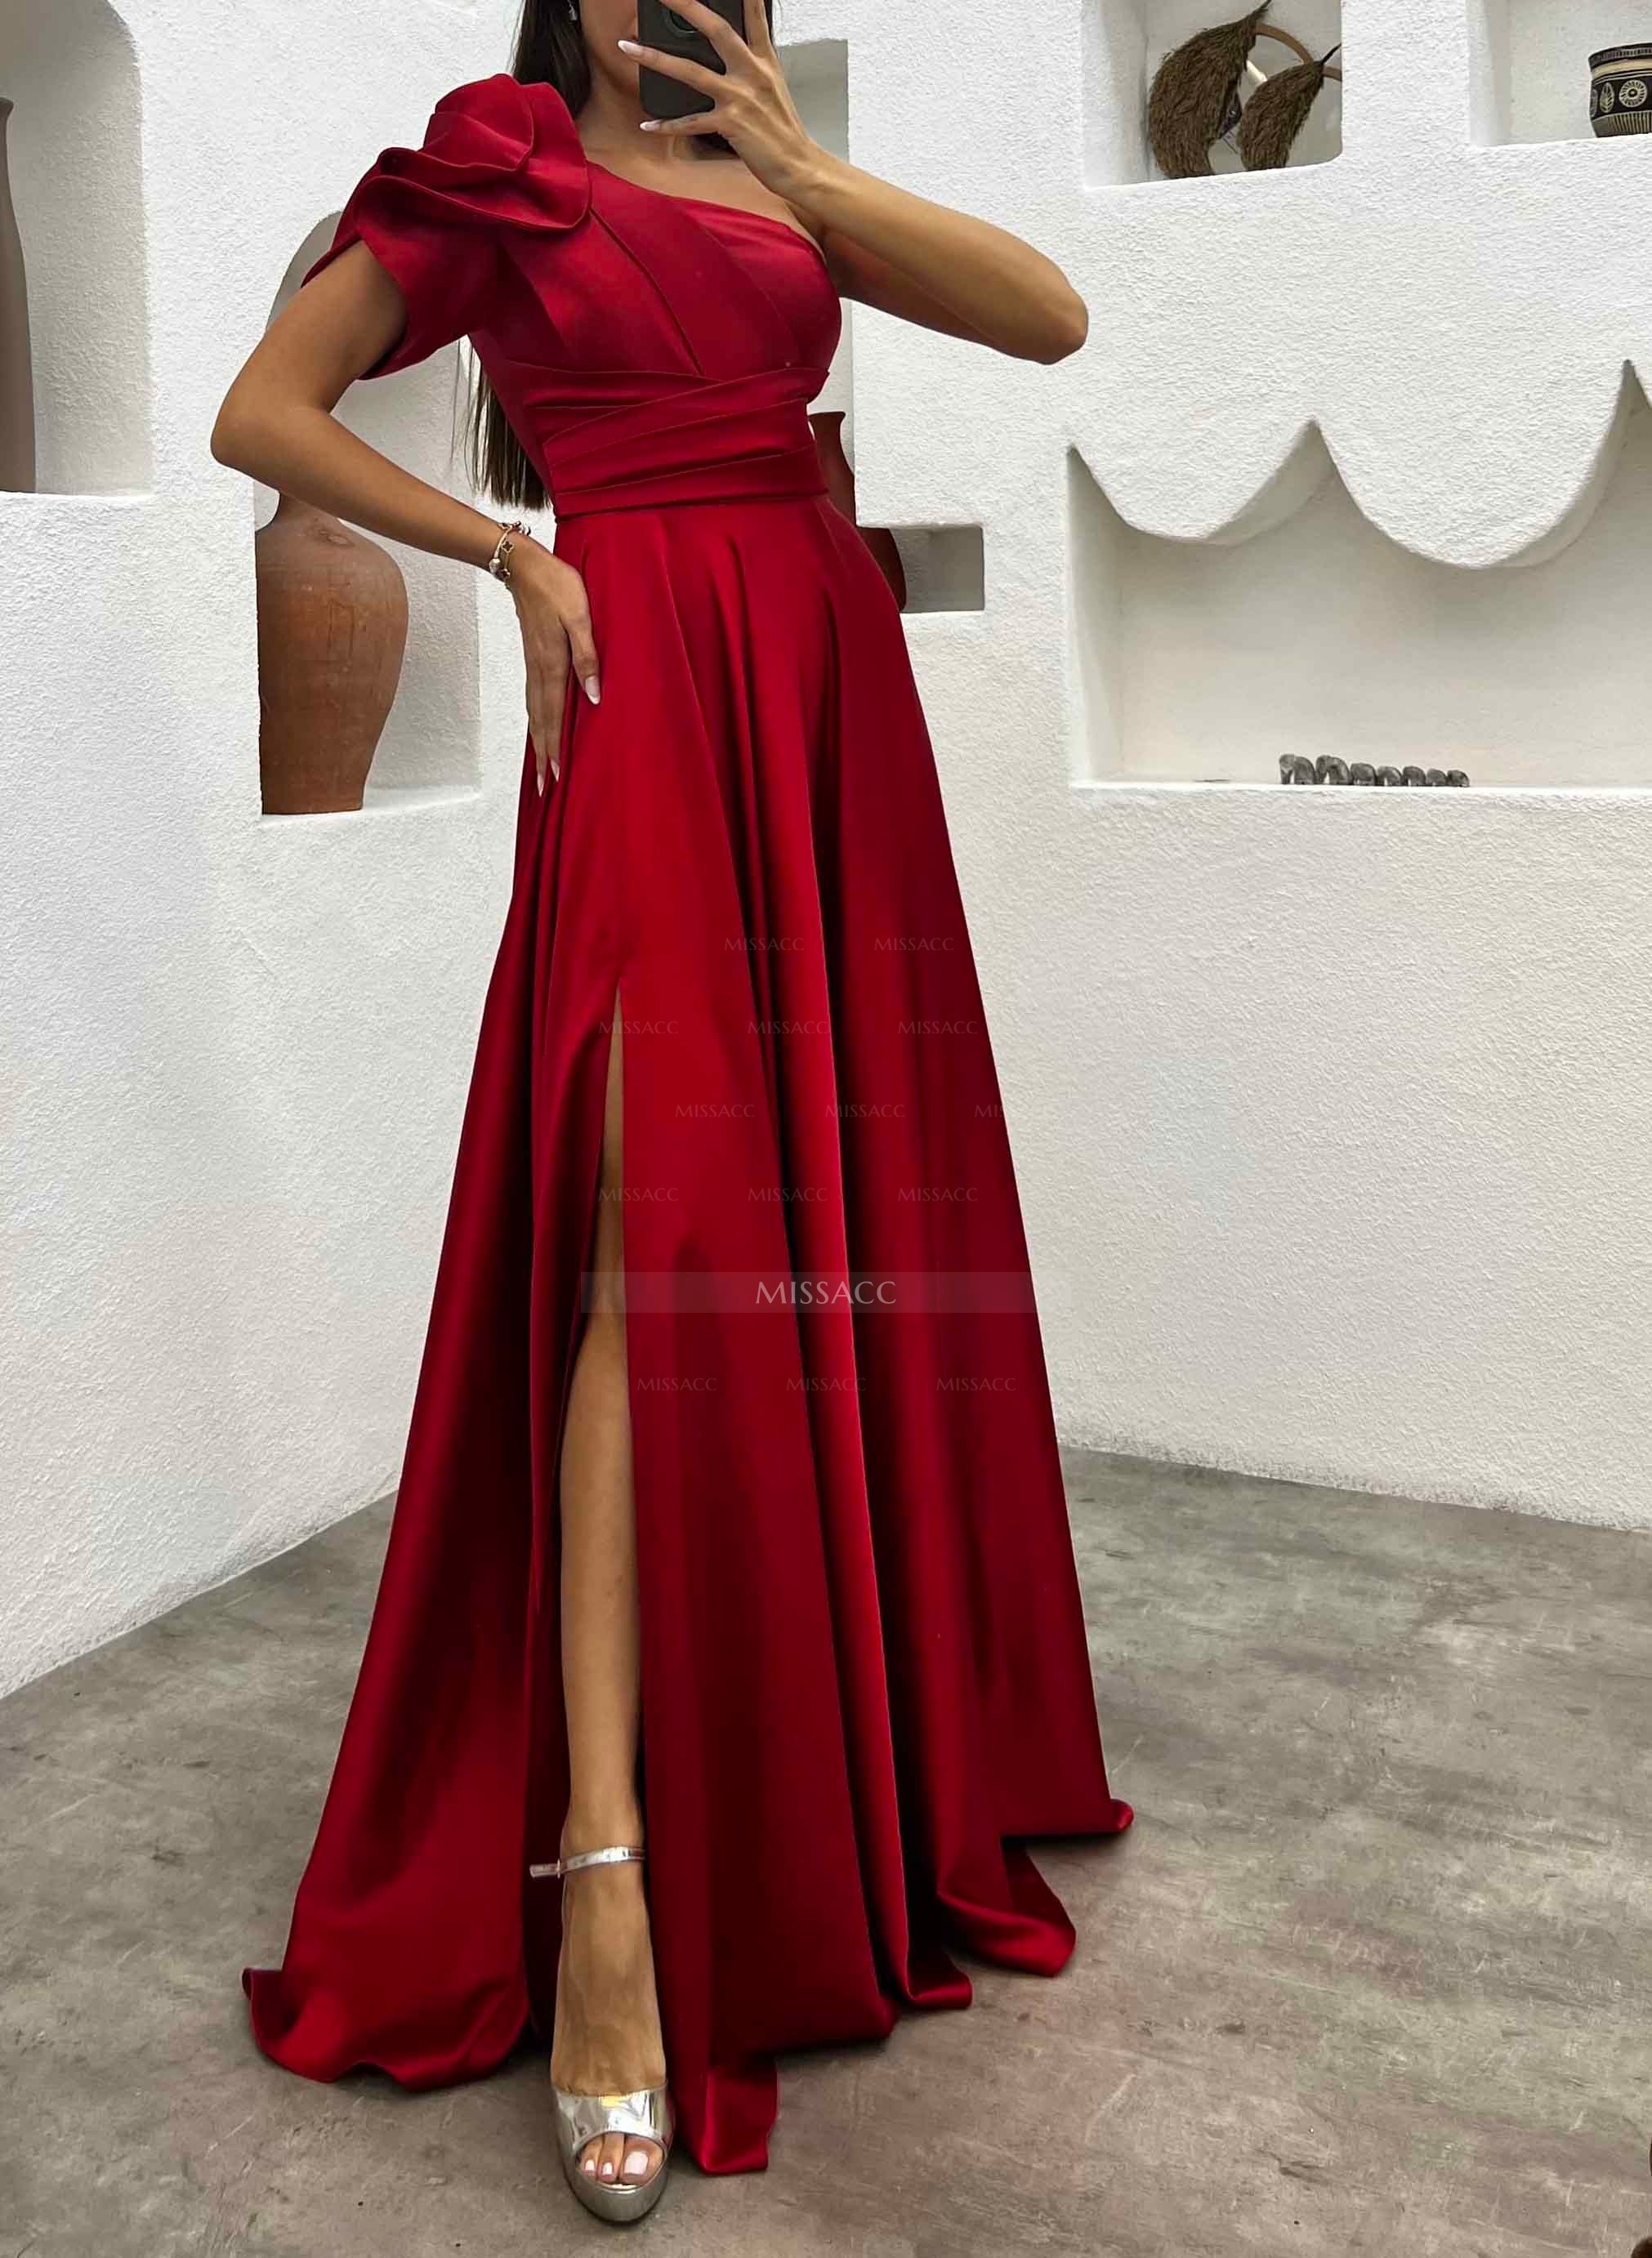 A-Line One-Shoulder Short Sleeves Sweep Train Satin Bridesmaid Dresses With Ruffle